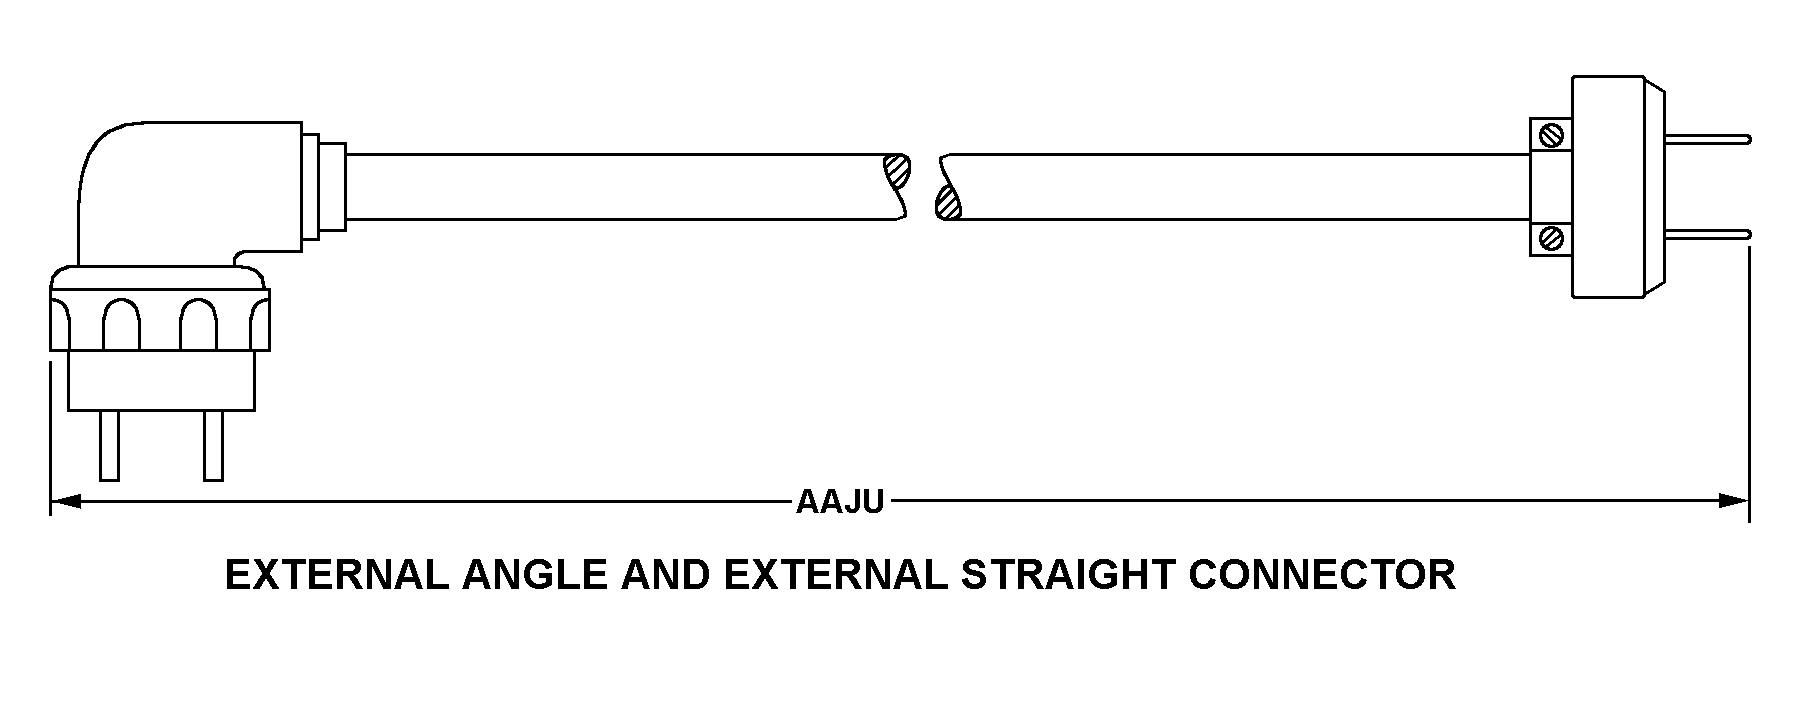 EXTERNAL ANGLE AND EXTERNAL STRAIGHT CONNECTOR style nsn 5995-01-574-9041